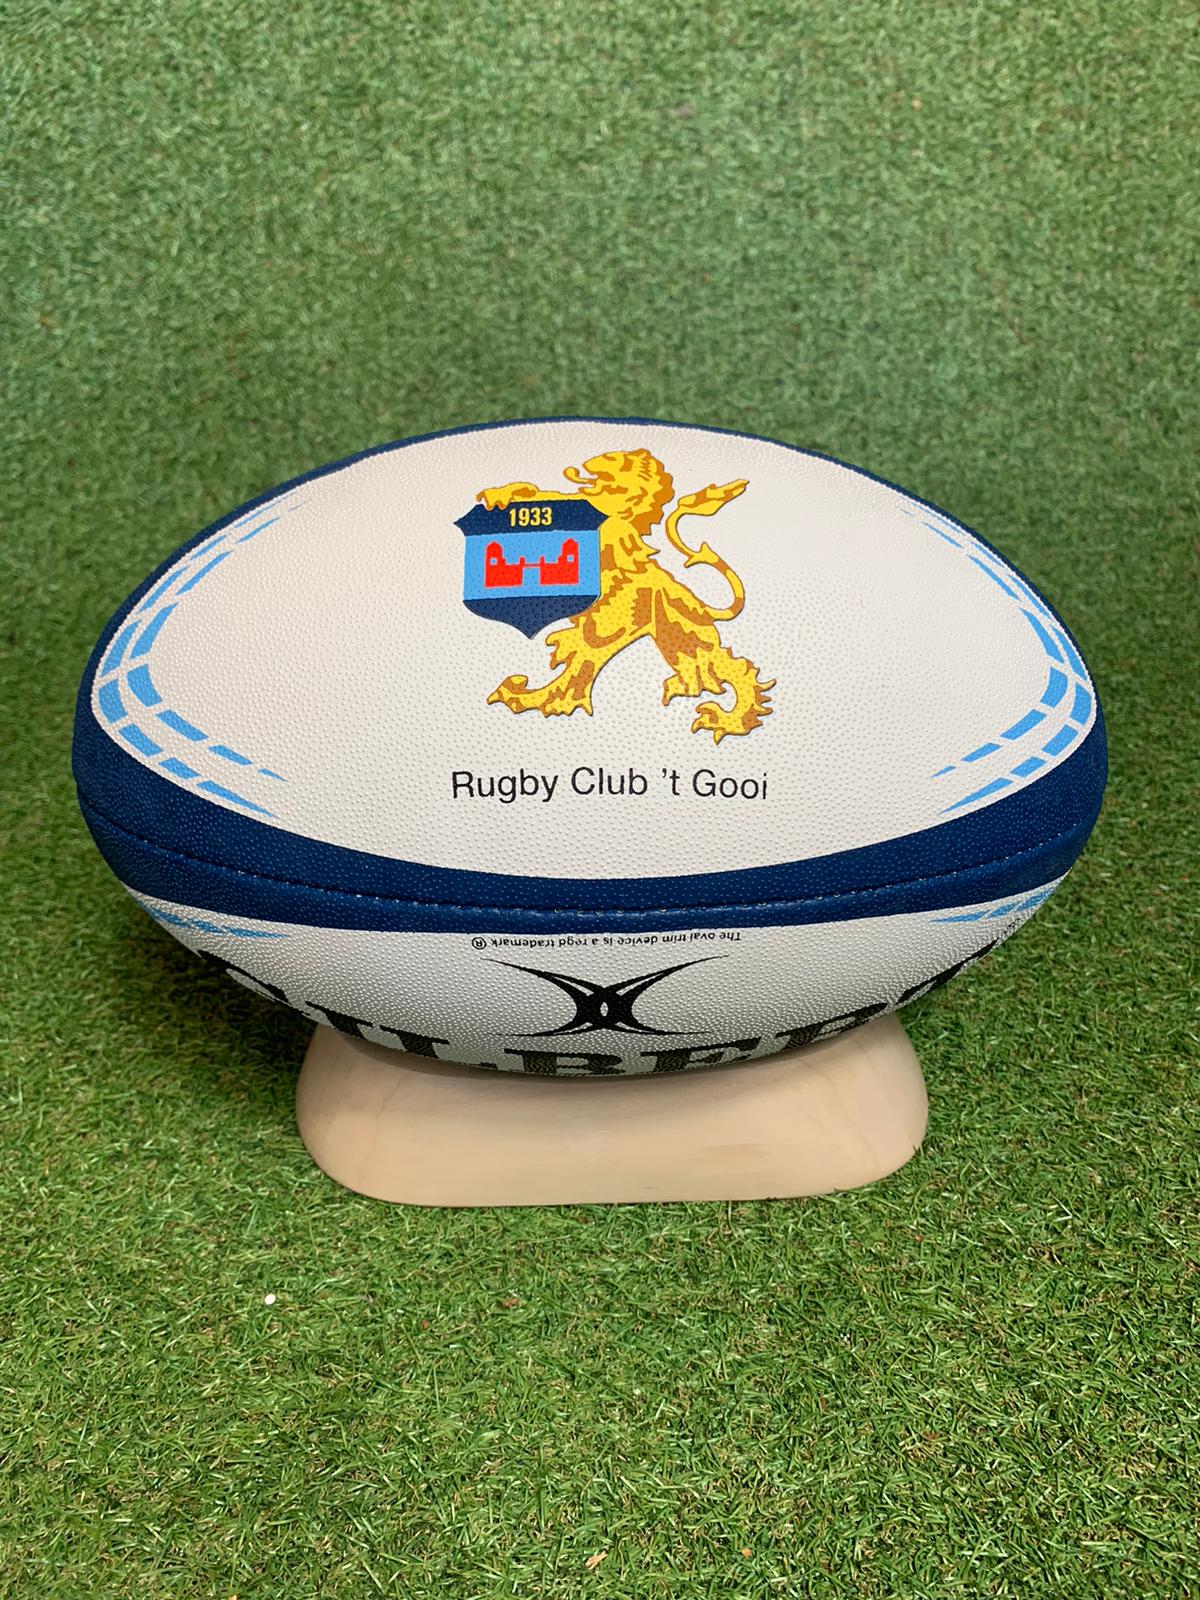 Rugby ball RC 'T Gooi Size 3